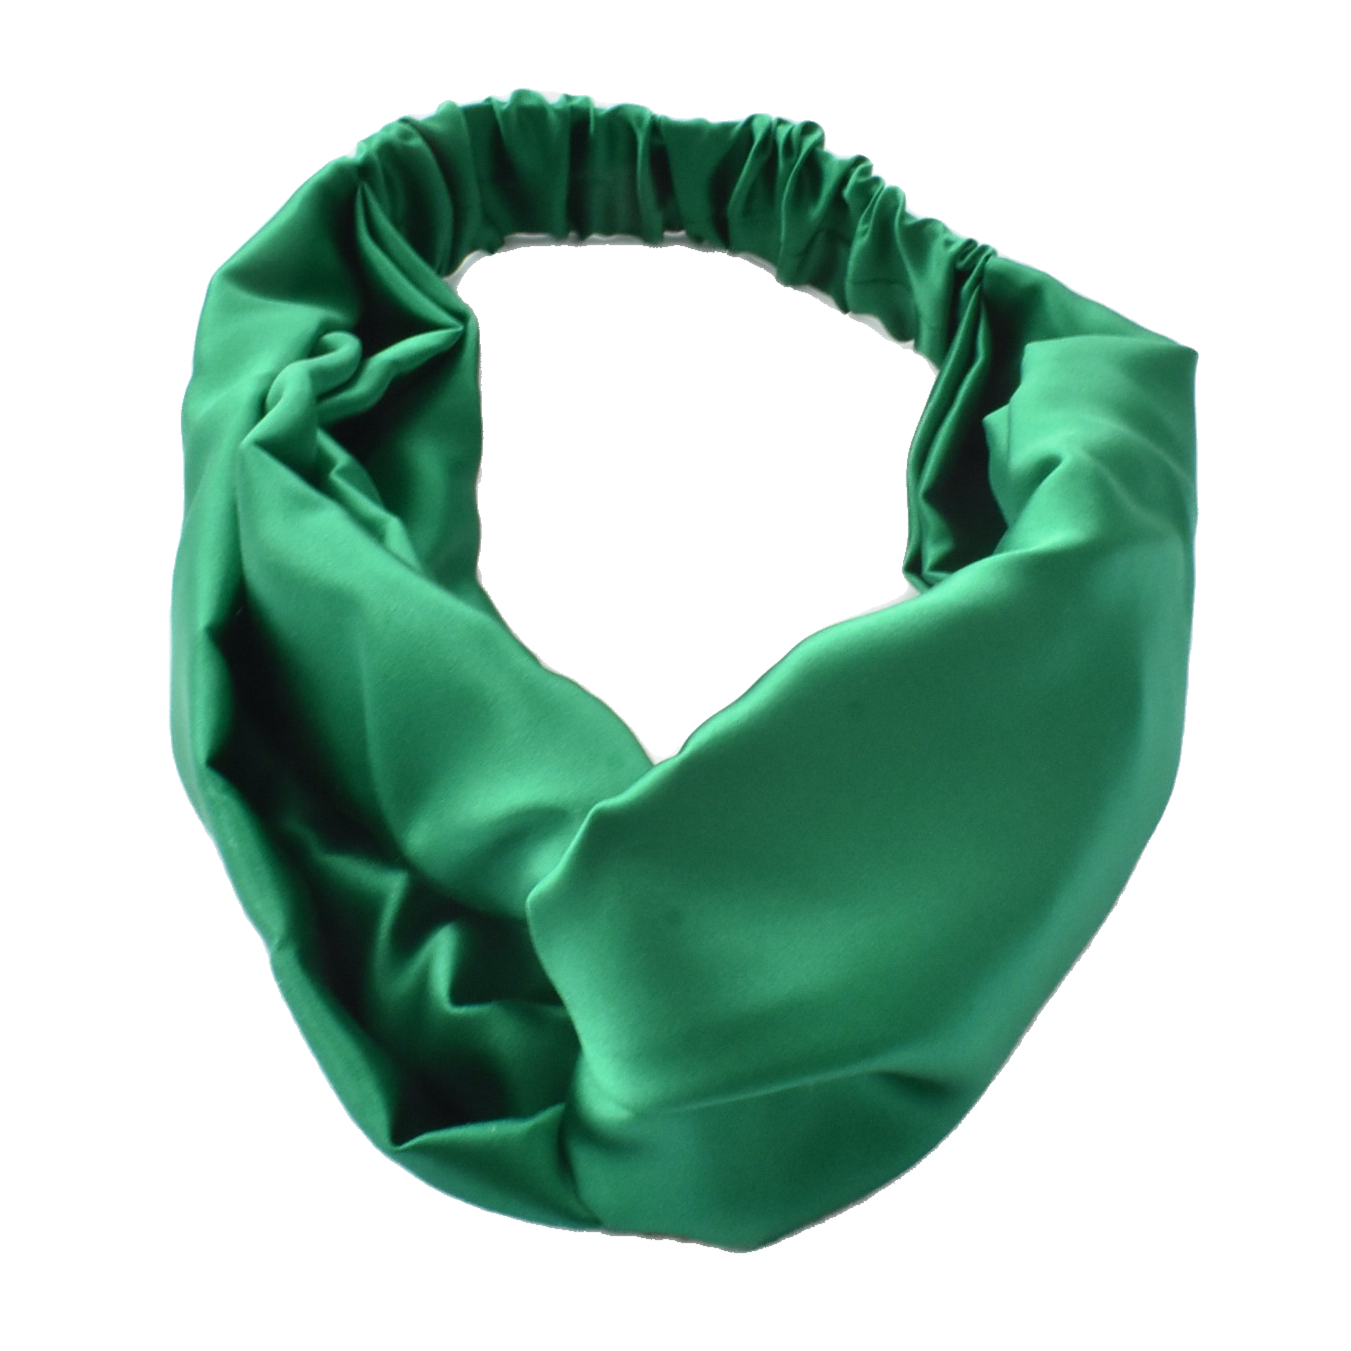 Silk Twisted Turban hairband and neck scarf in Emerald Green Mulberry Silk - 100% pure silk satin